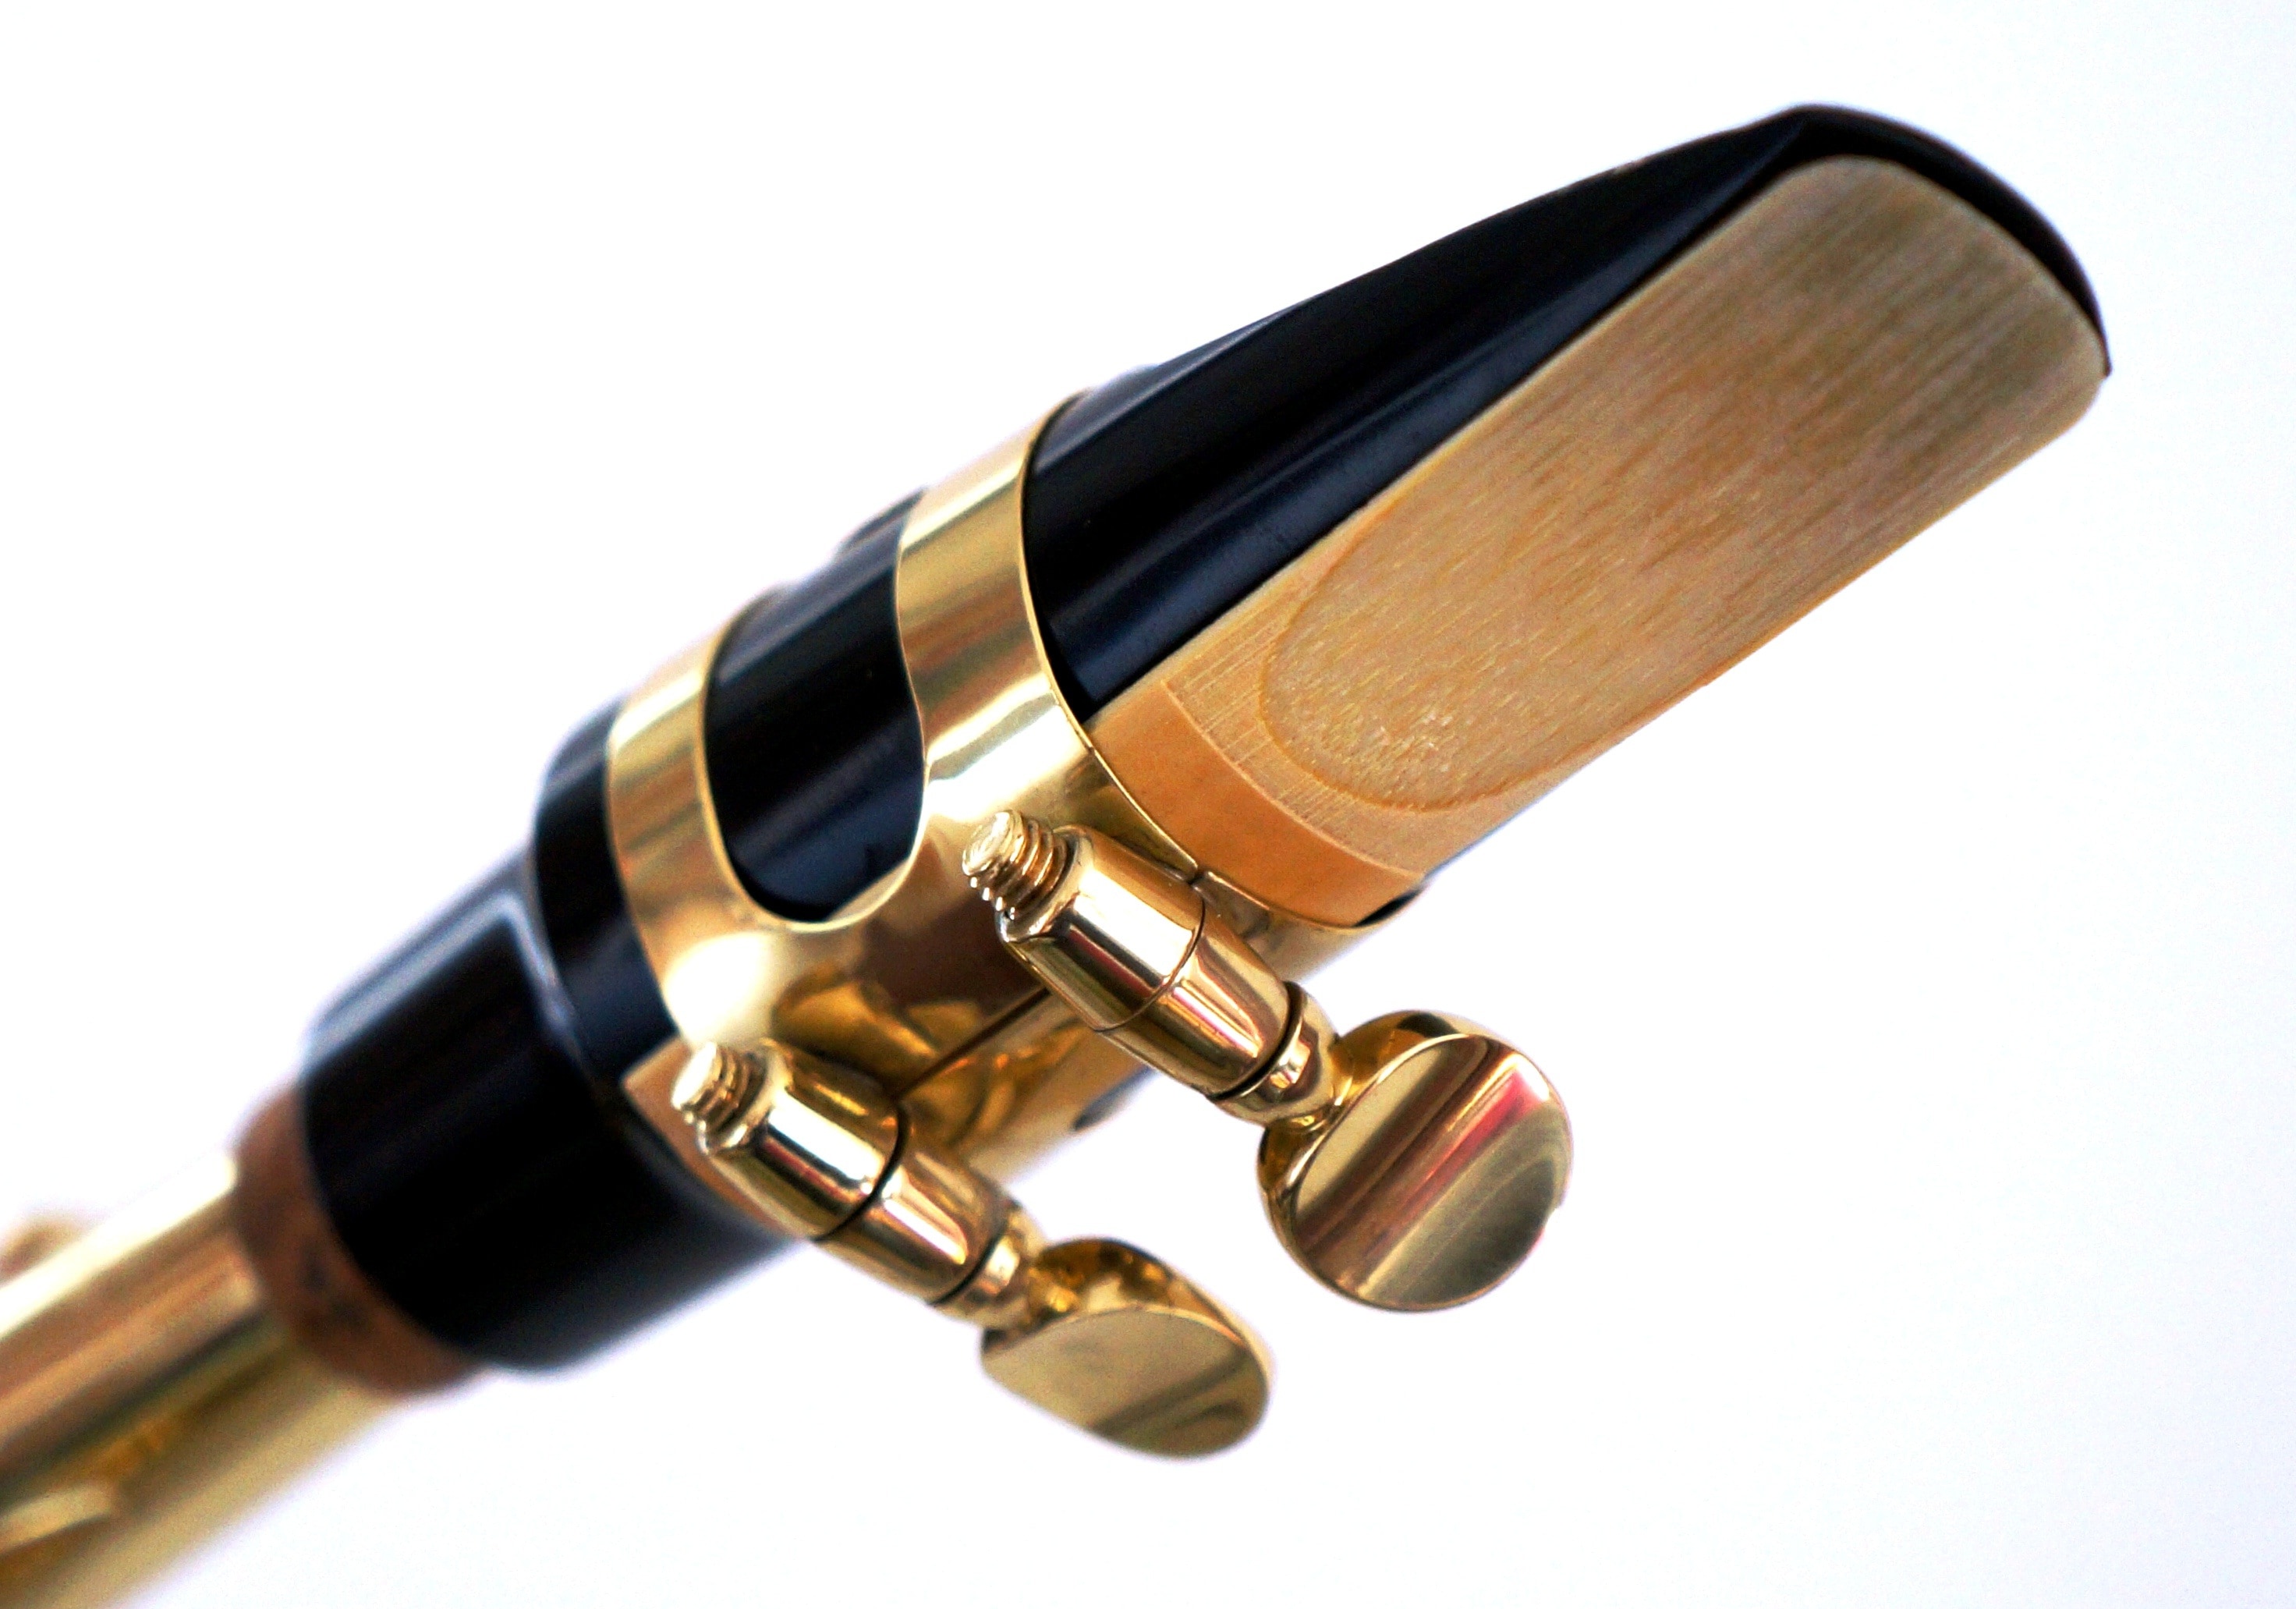 Sax Mouthpiece With Reed - HD Wallpaper 